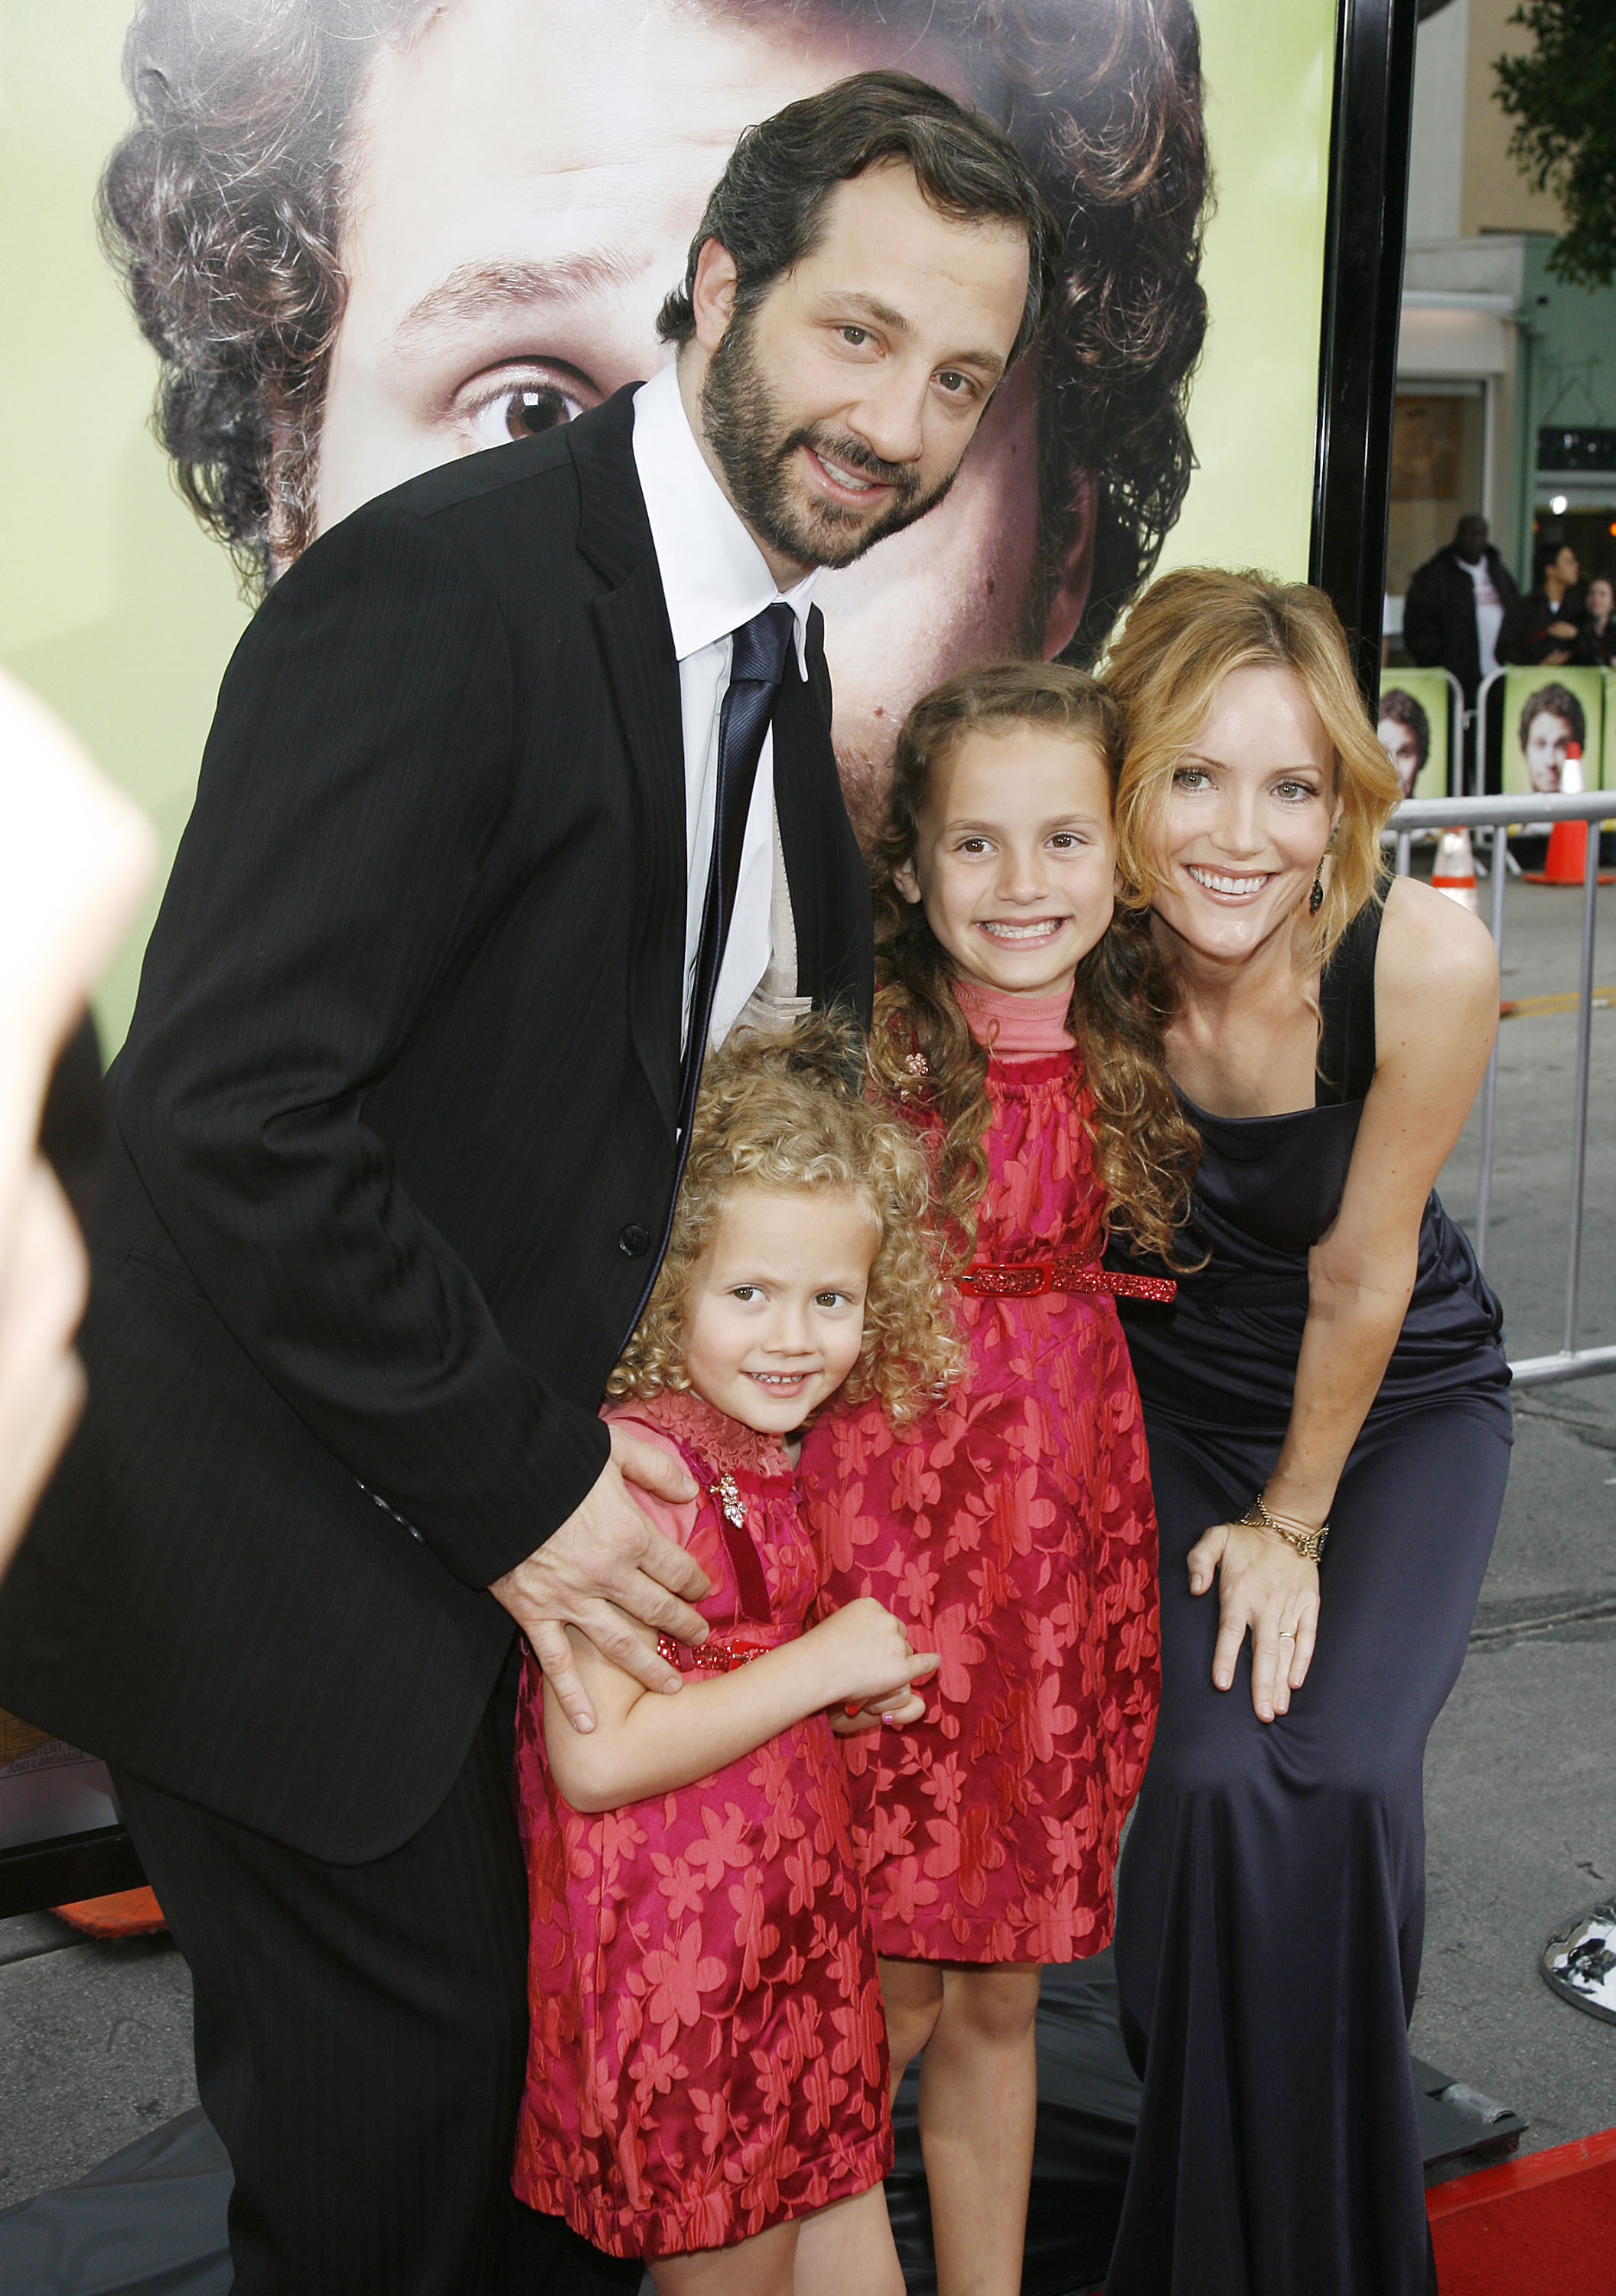 <p><span>Filmmaker Judd Apatow and actress Leslie Mann brought their daughters, a then 4-year-old Iris and a then-9-year-old Maude to the premiere of his movie "Knocked Up" in Los Angeles on May 21, 2007. Keep reading to see the girls as adults...</span></p>